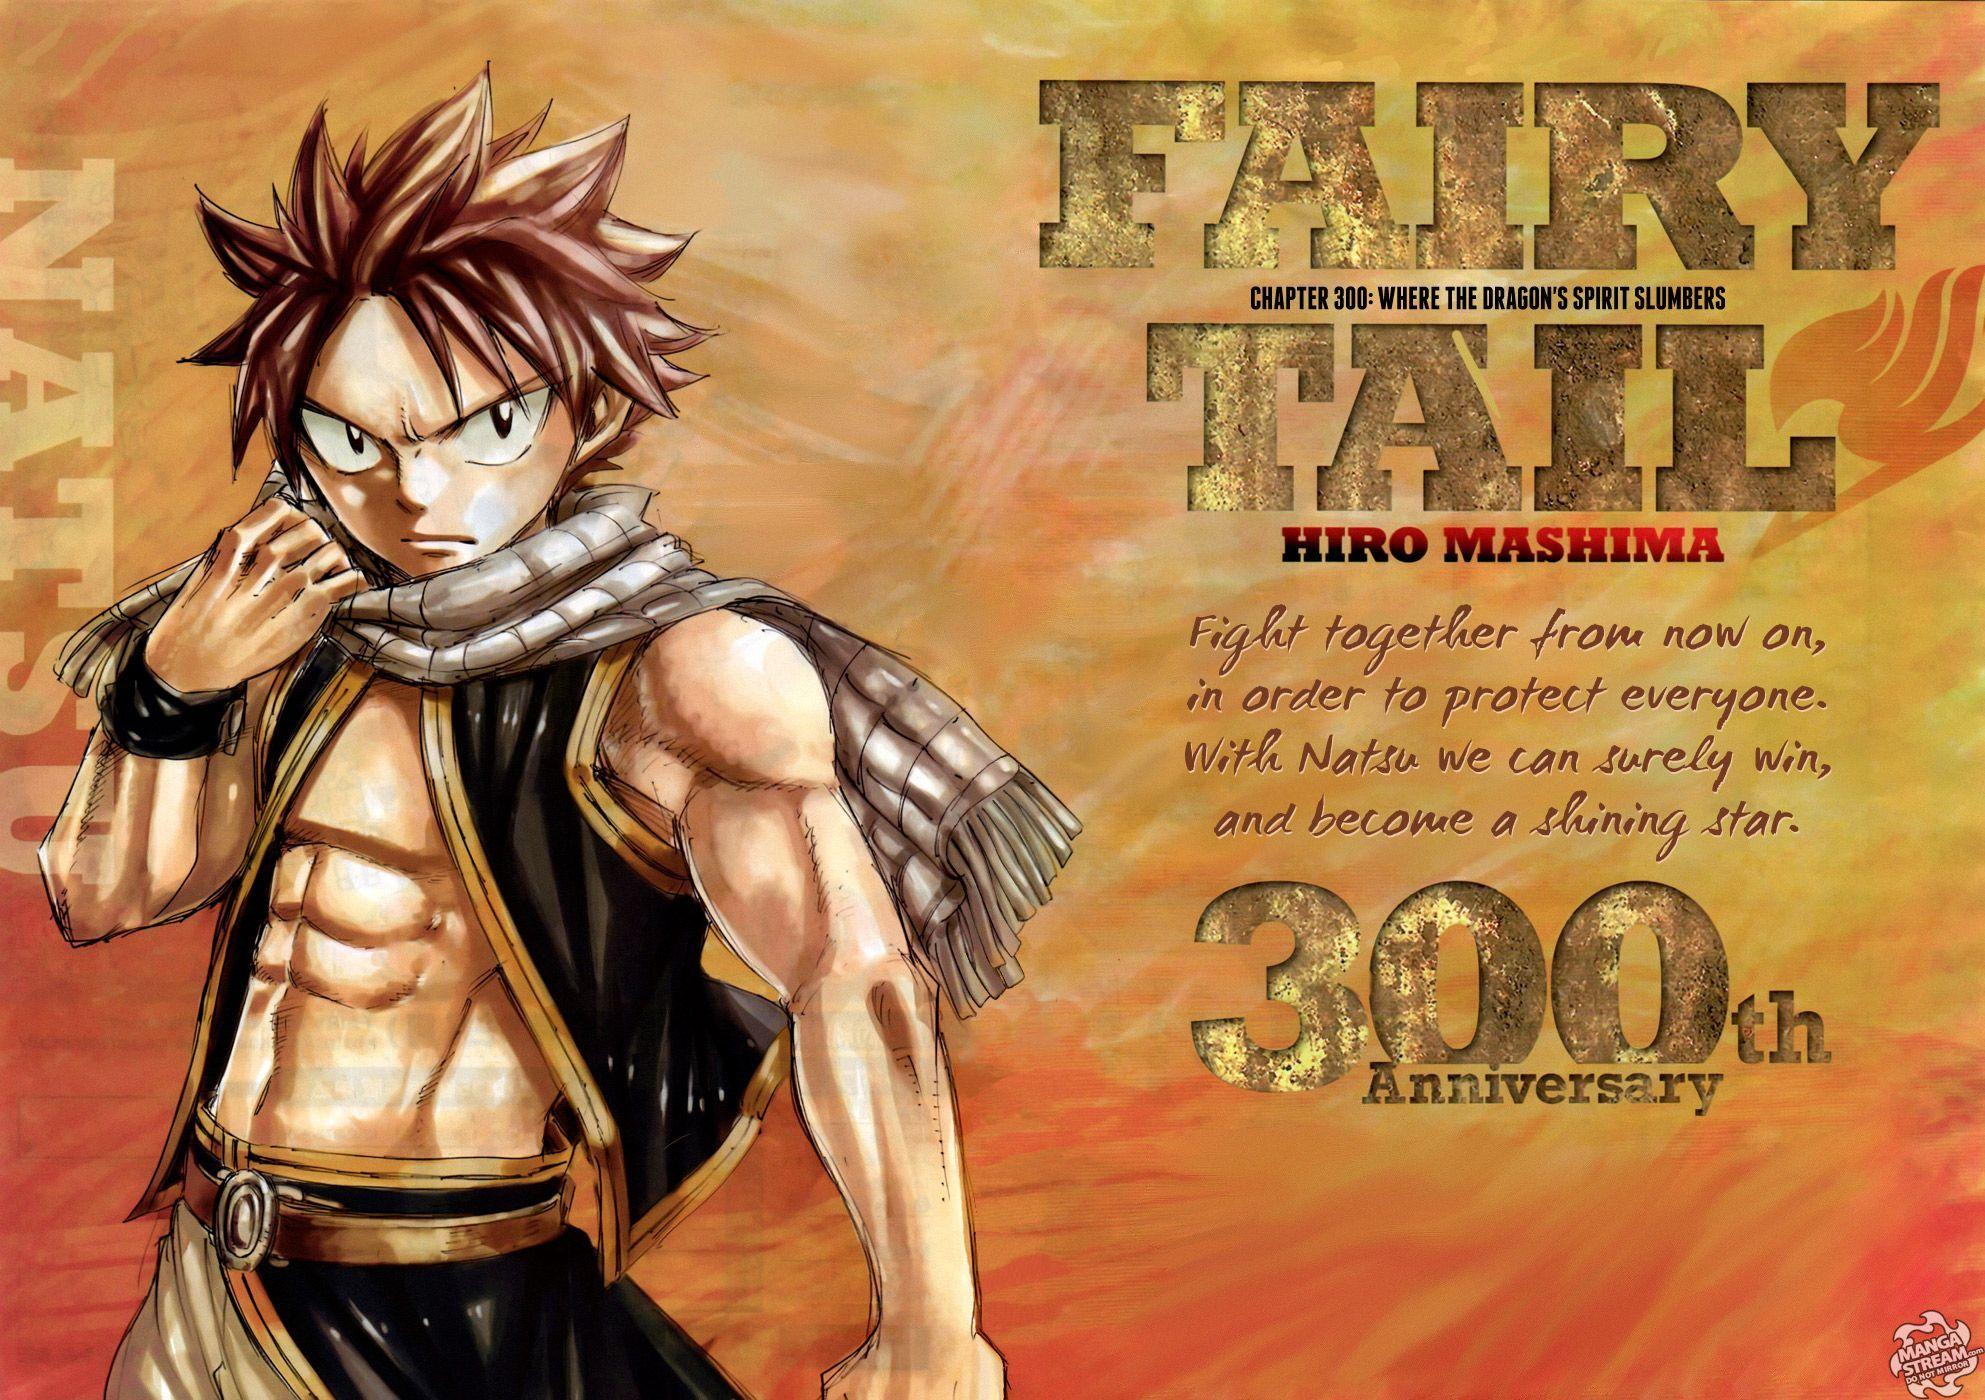 Fairy Tail Natsu Chapter 300 Exclusive HD Wallpapers #